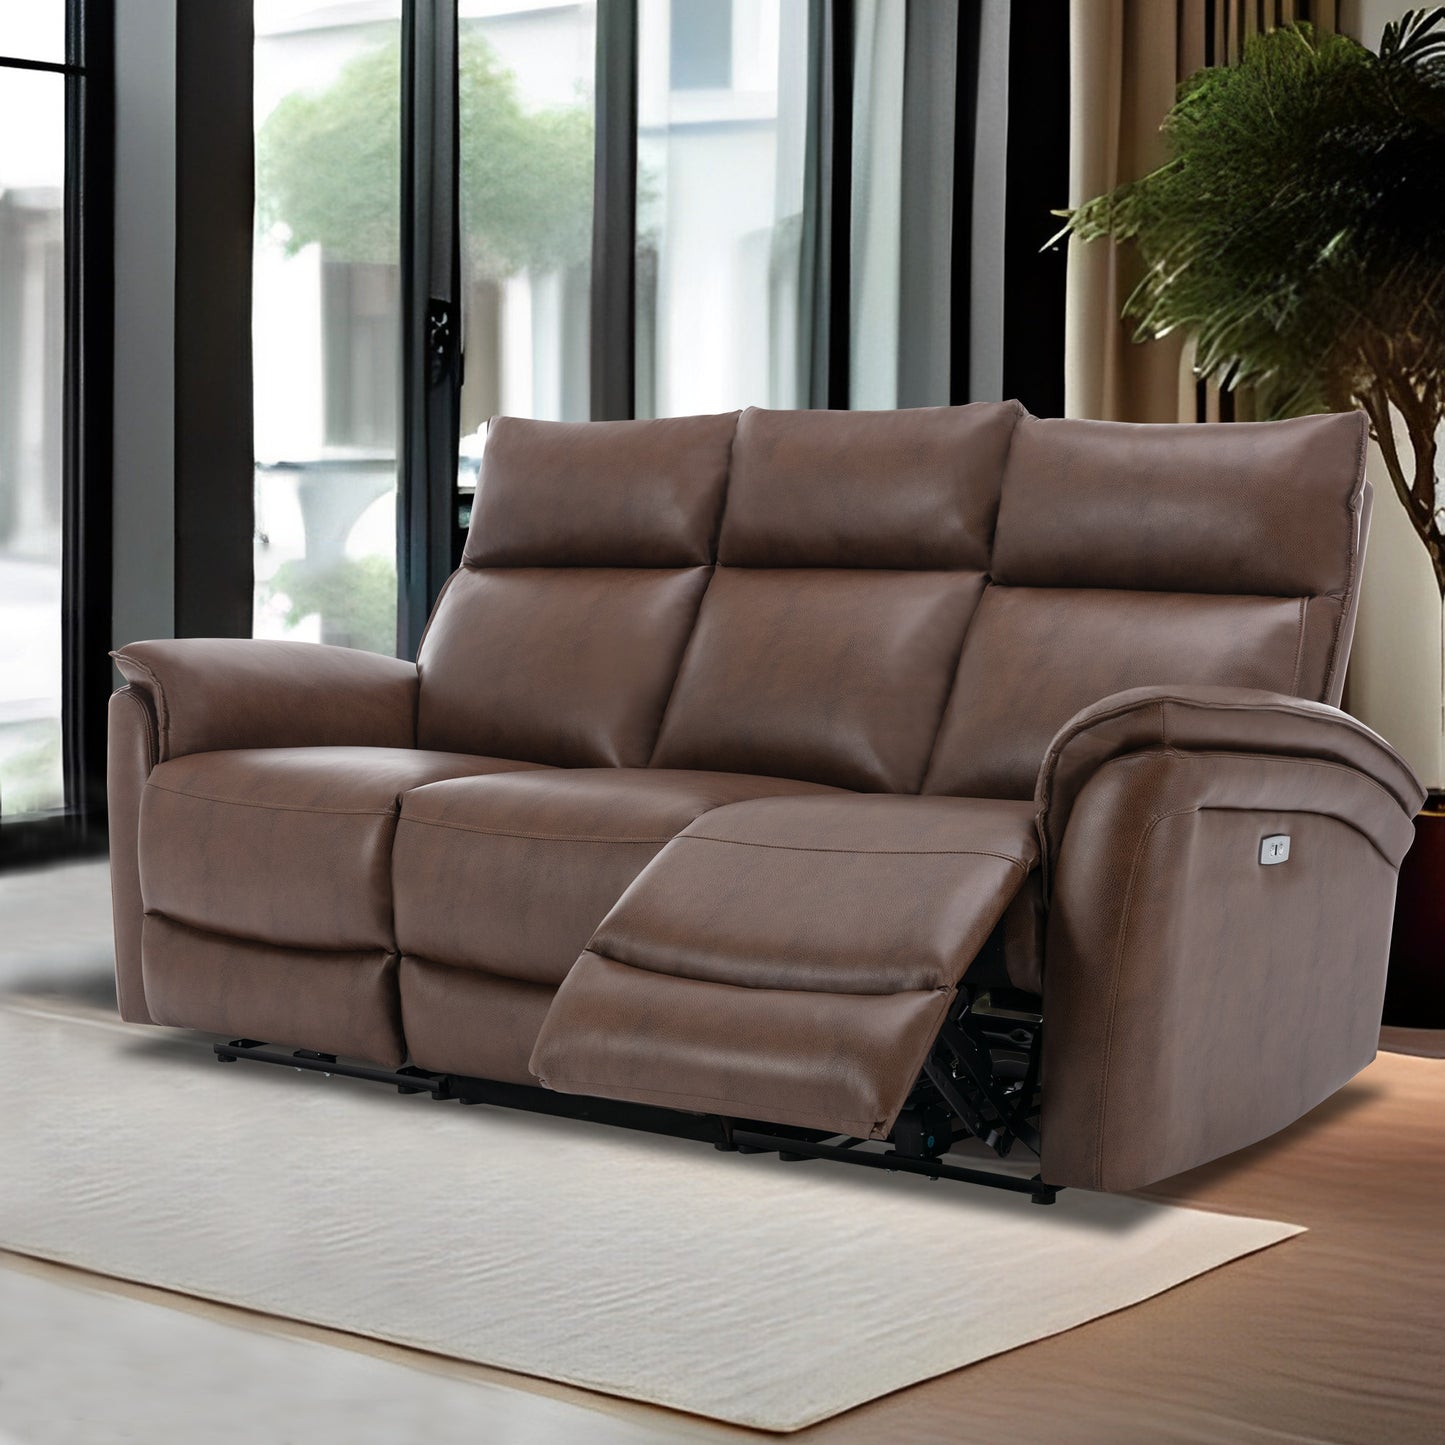 COLAMY PU Leather Dark Brown Power Reclining 3-Seat Home Theater Seating Sofa model.60439